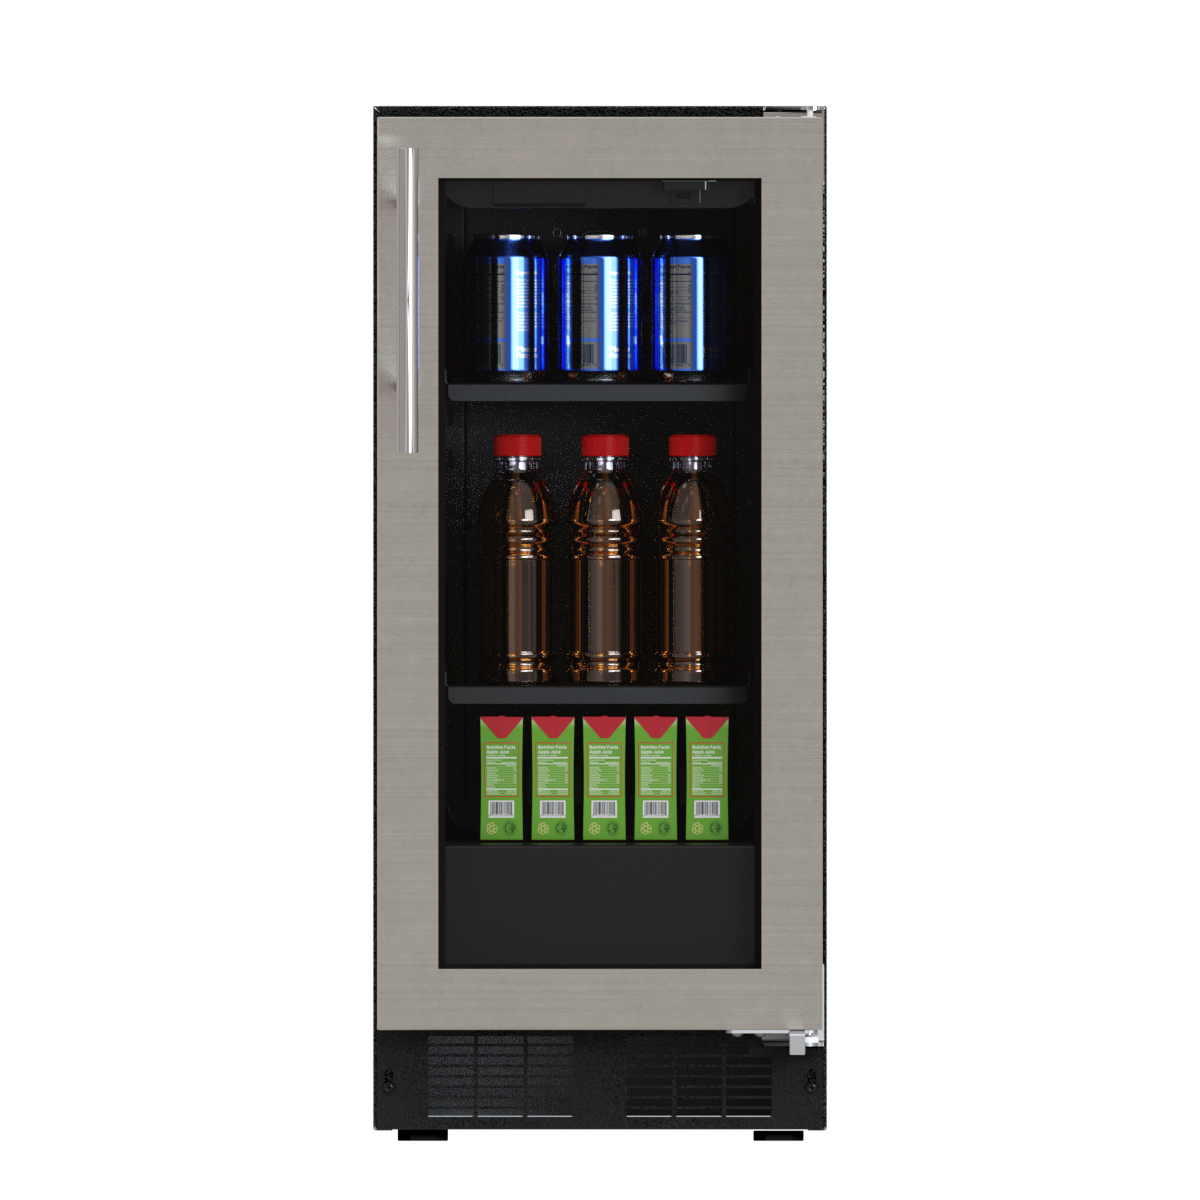 Northland 15 in. Undercounter Beverage Center, NL15BCG0RS